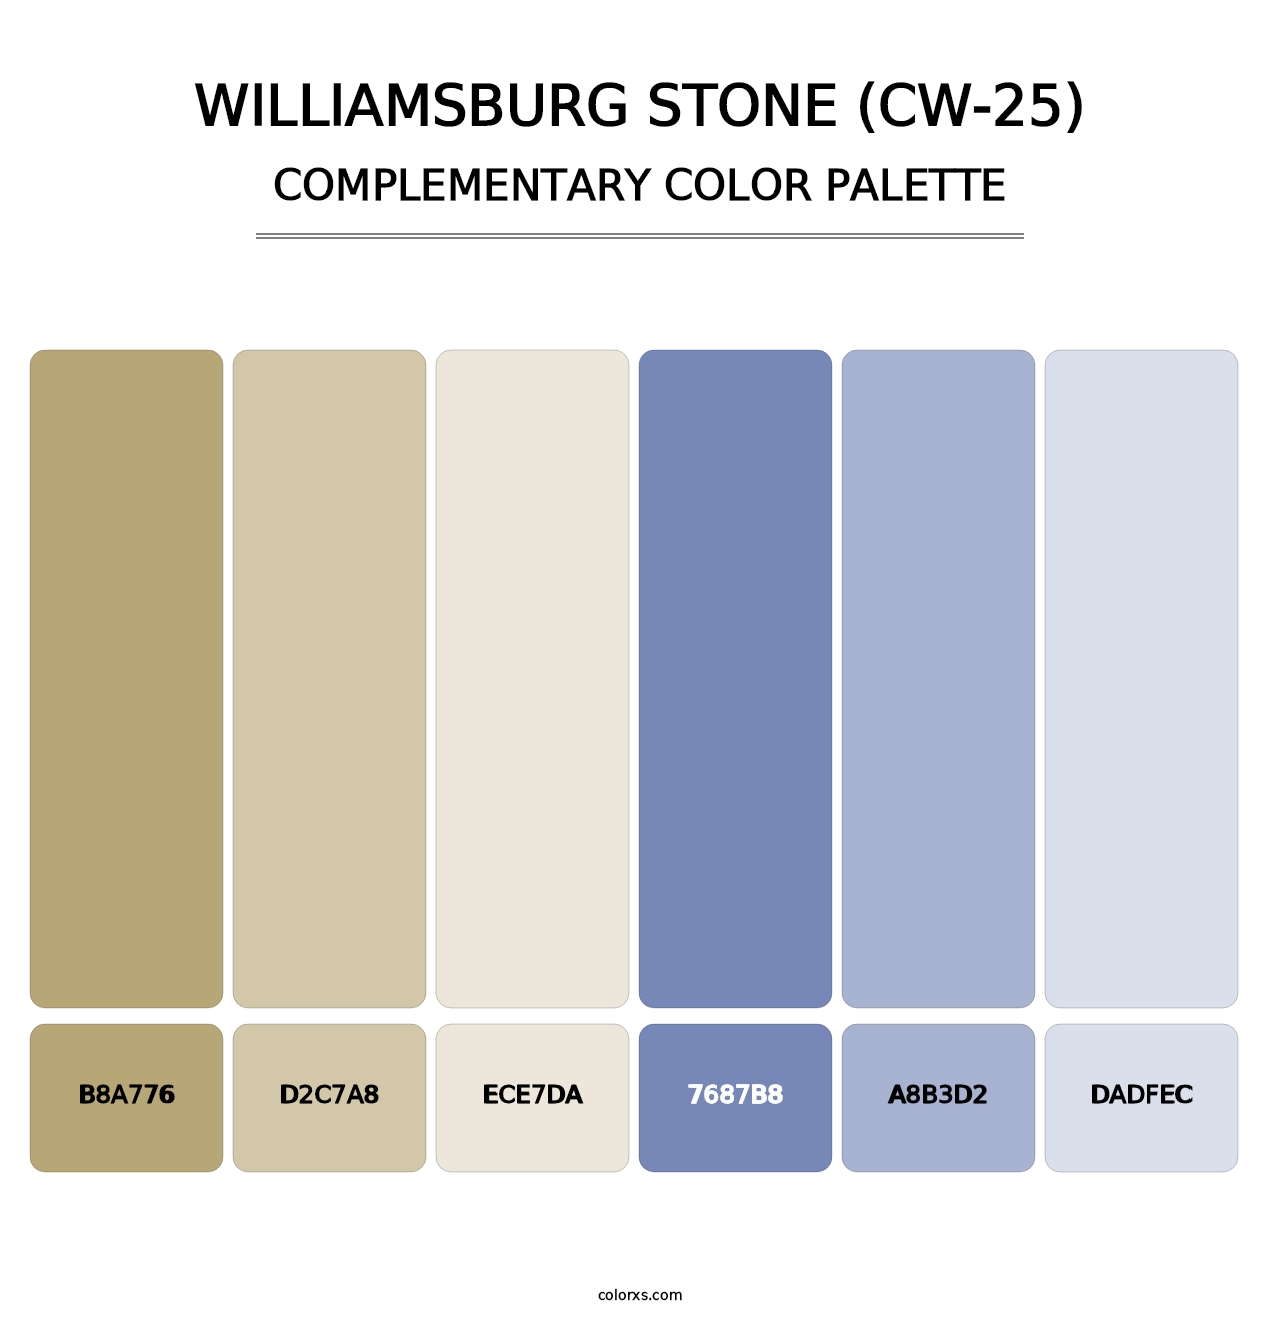 Williamsburg Stone (CW-25) - Complementary Color Palette